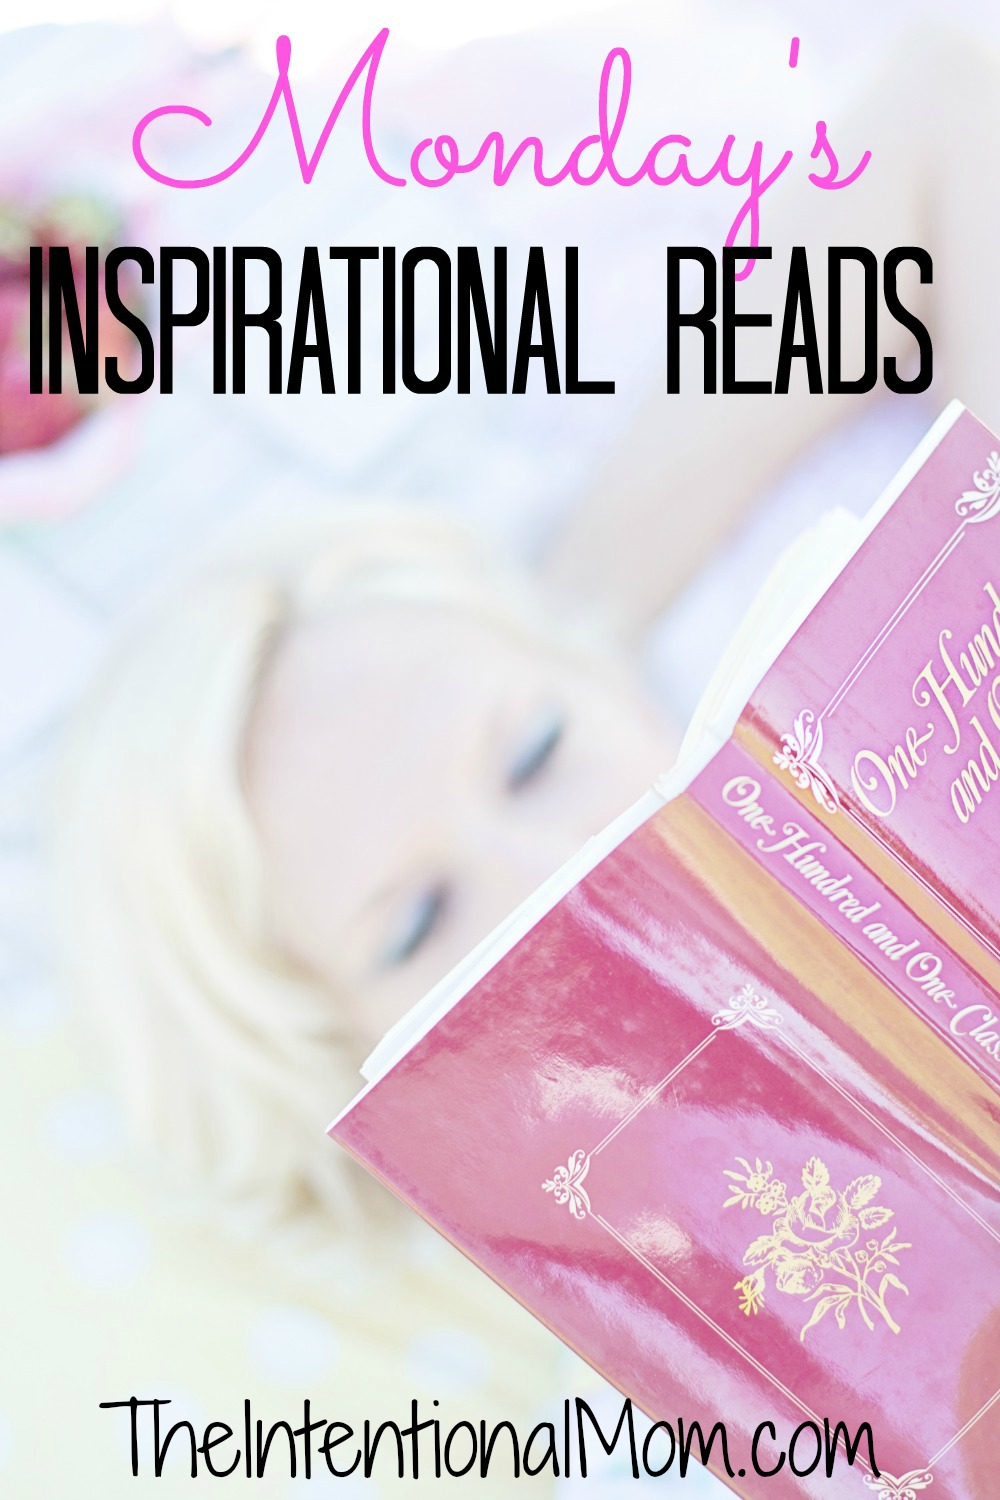 Introducing Monday’s Inspirational Reads – A New Book Club For 2016!